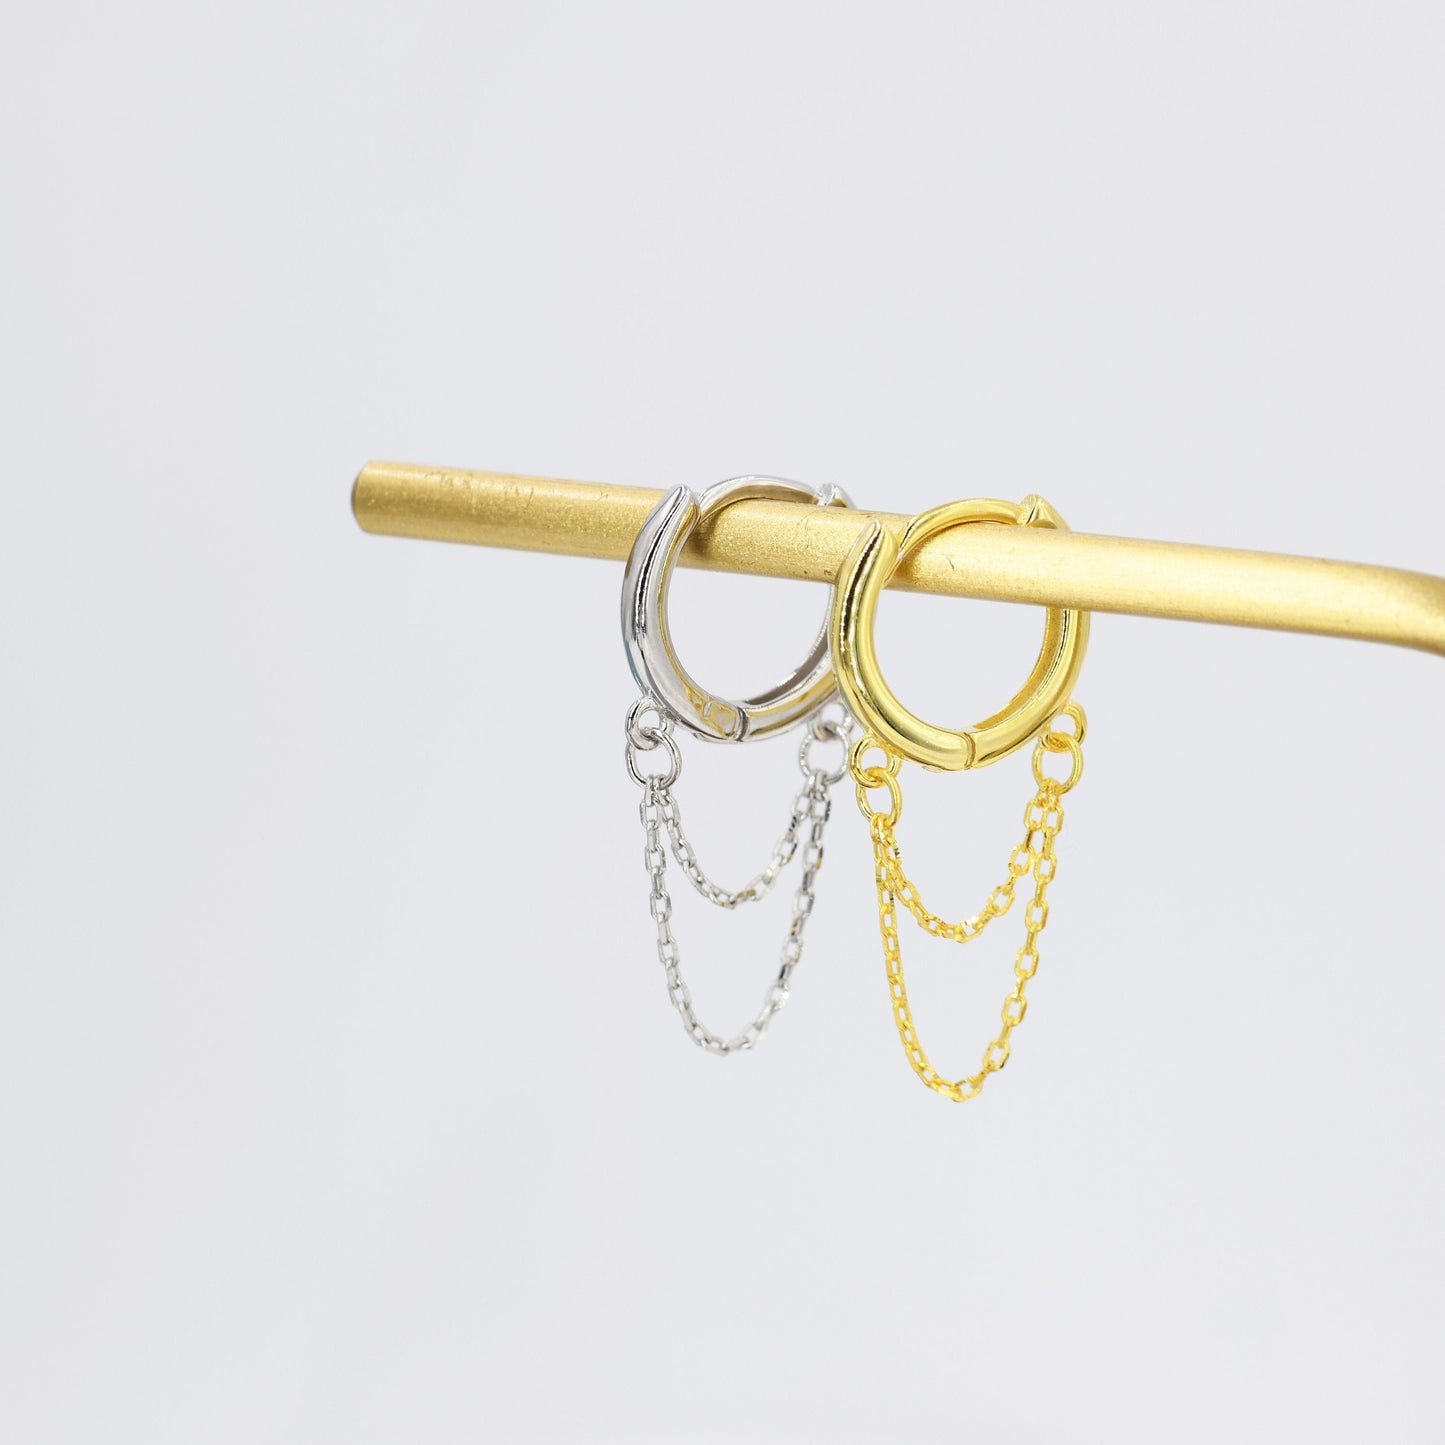 Chained Hoop Earrings in Sterling Silver, Silver or Gold, Huggie Hoops with Double Chains